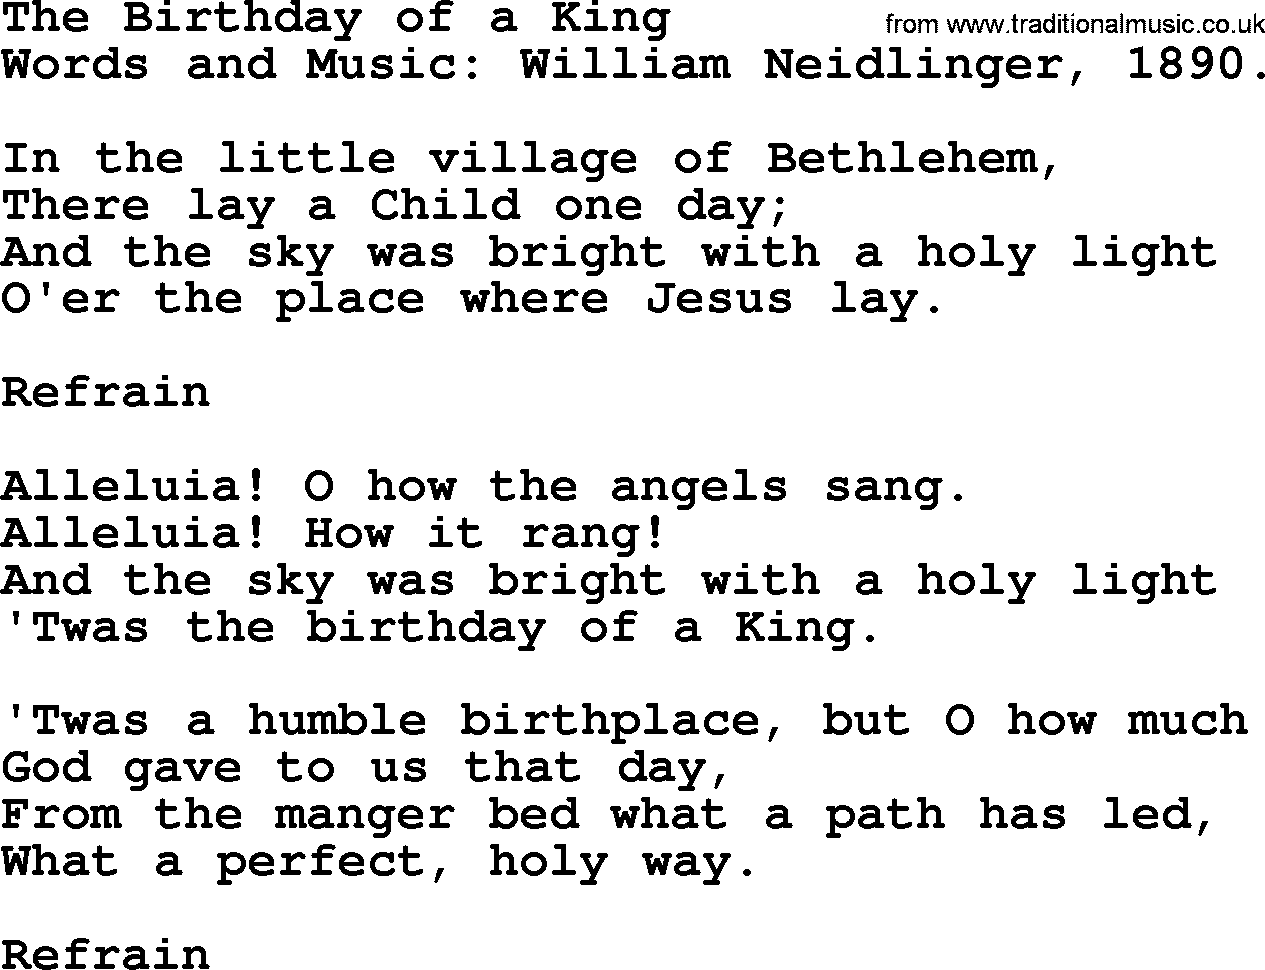 280 Christmas Hymns and songs with PowerPoints and PDF, title: The Birthday Of A King, lyrics, PPT and PDF